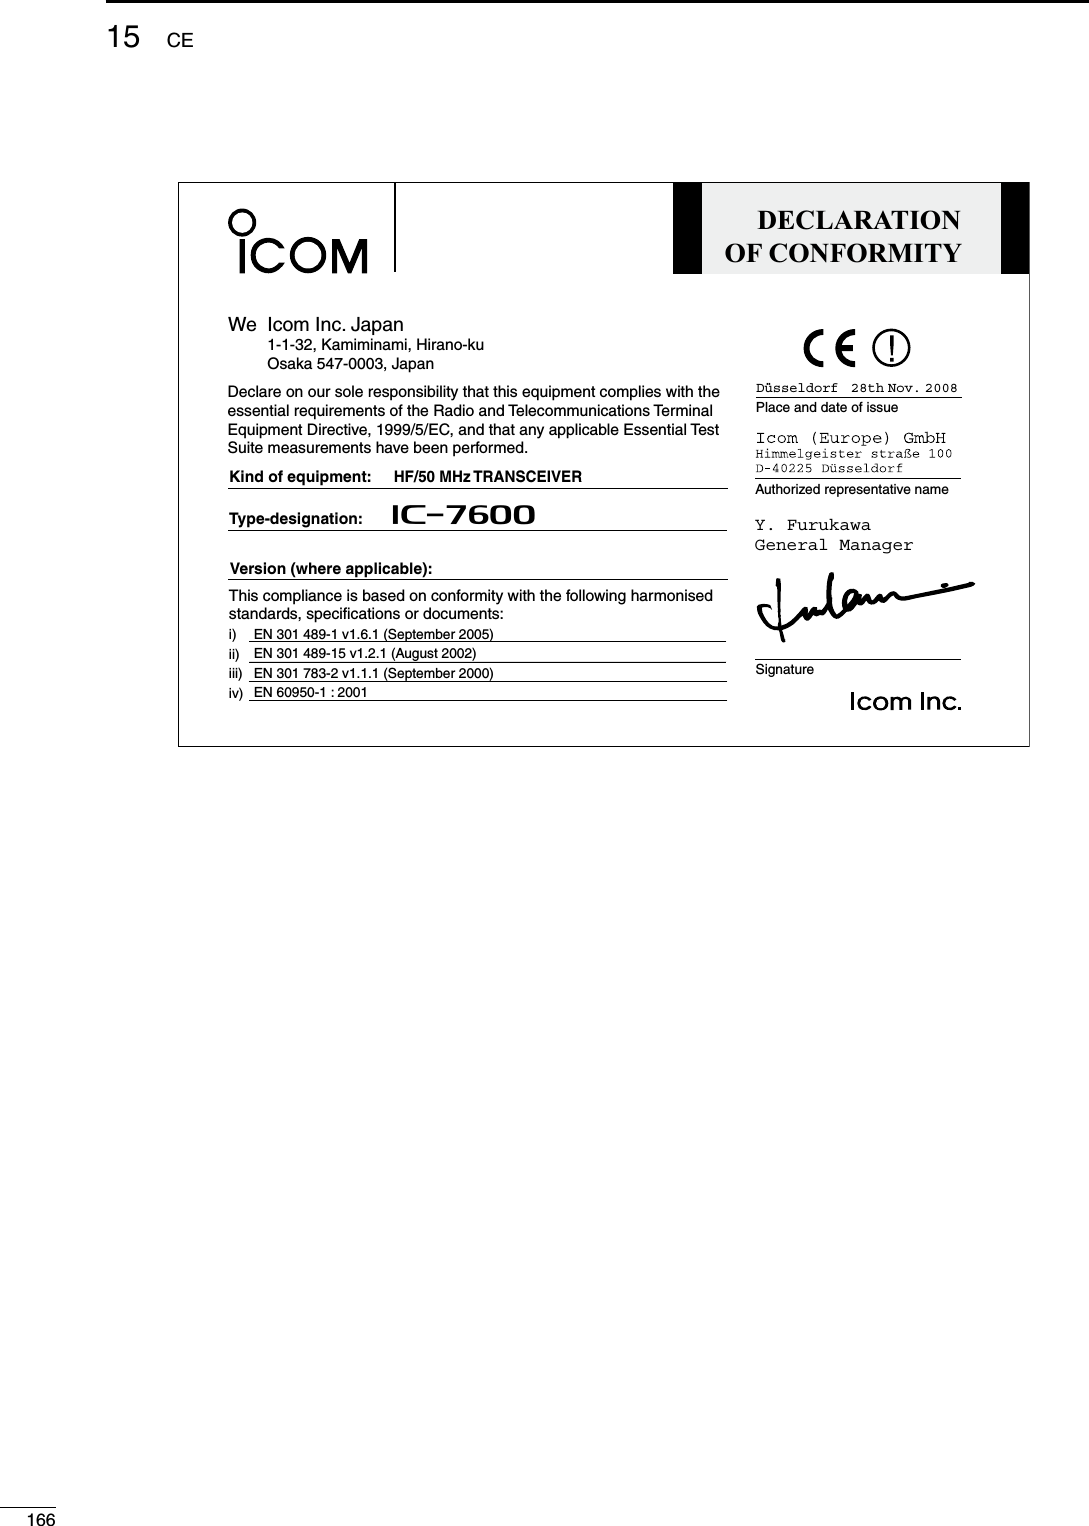 DECLARATIONOF CONFORMITYWe Icom Inc. Japan1-1-32, Kamiminami, Hirano-kuOsaka 547-0003, JapanKind of equipment:     HF/50 MHz TRANSCEIVERType-designation:       iC- 7600SignatureAuthorized representative namePlace and date of issueDeclare on our sole responsibility that this equipment complies with theessential requirements of the Radio and Telecommunications Terminal Equipment Directive, 1999/5/EC, and that any applicable Essential TestSuite measurements have been performed.Version (where applicable):This compliance is based on conformity with the following harmonised standards, specifications or documents:i)ii)iii)iv)Düsseldorf   28th Nov. 2008Y. FurukawaGeneral ManagerEN 301 489-1 v1.6.1 (September 2005)EN 301 489-15 v1.2.1 (August 2002) EN 301 783-2 v1.1.1 (September 2000)  EN 60950-1 : 2001  16615 CE